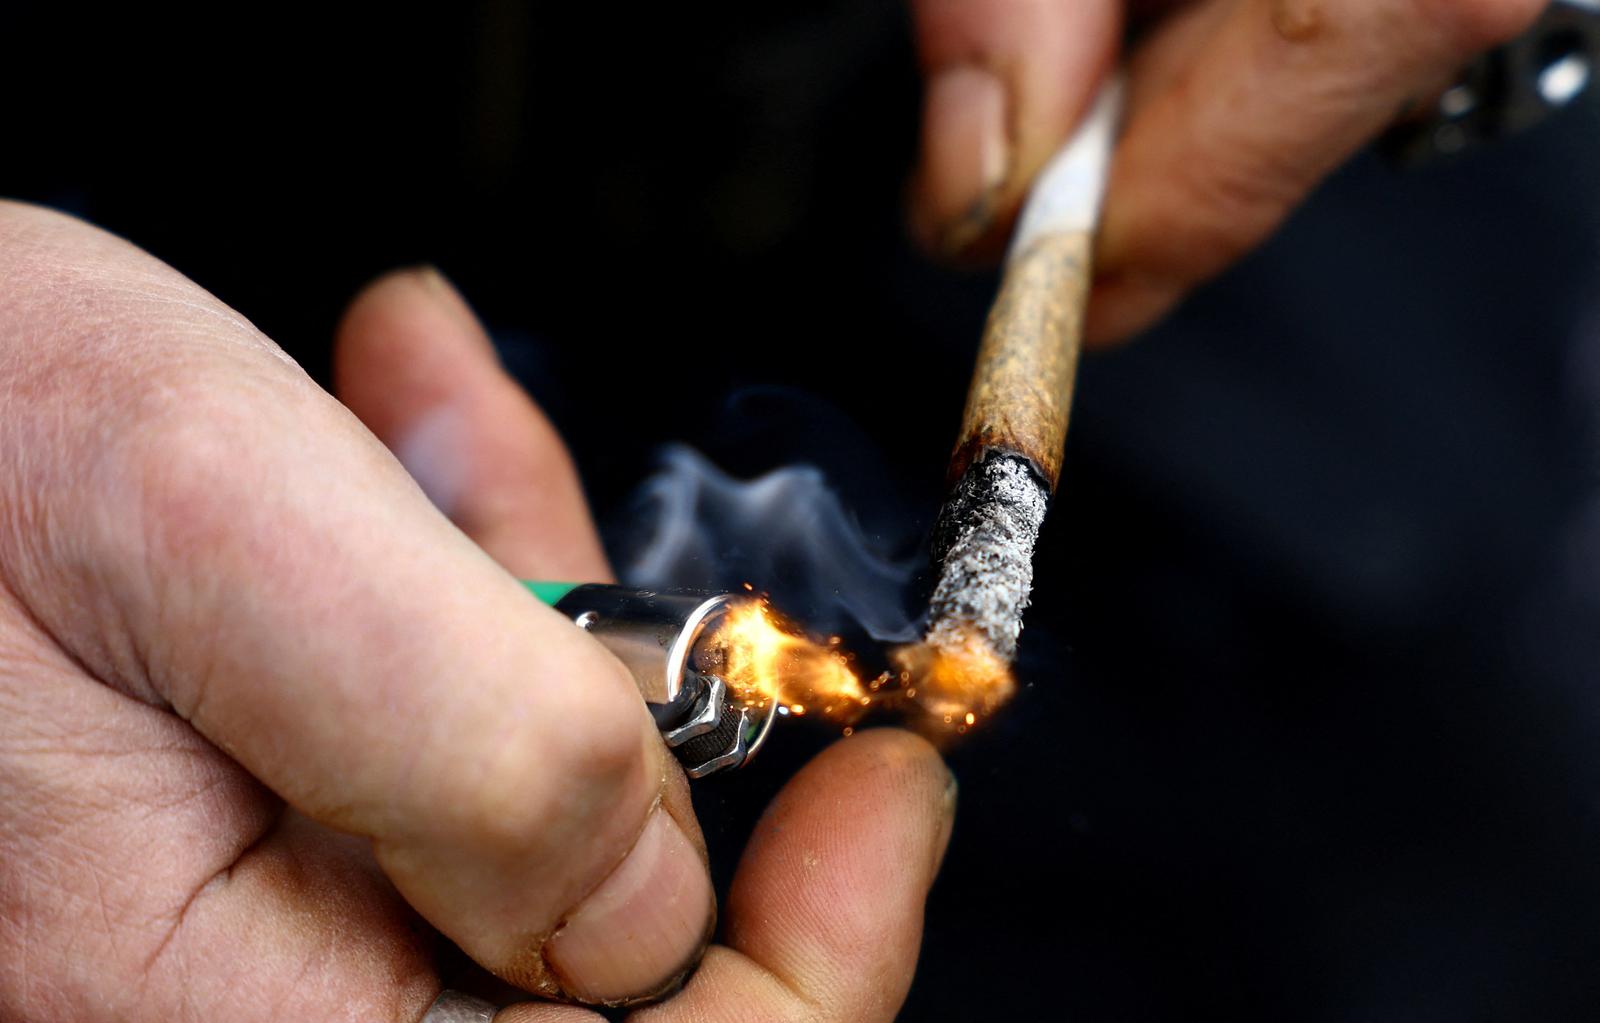 FILE PHOTO: A person lights a joint as marijuana activists gather to mark the annual world cannabis day and to protest for legalization of marijuana, in front of the Brandenburg Gate, in Berlin, Germany, April 20, 2022. REUTERS/Lisi Niesner/File Photo Photo: LISI NIESNER/REUTERS